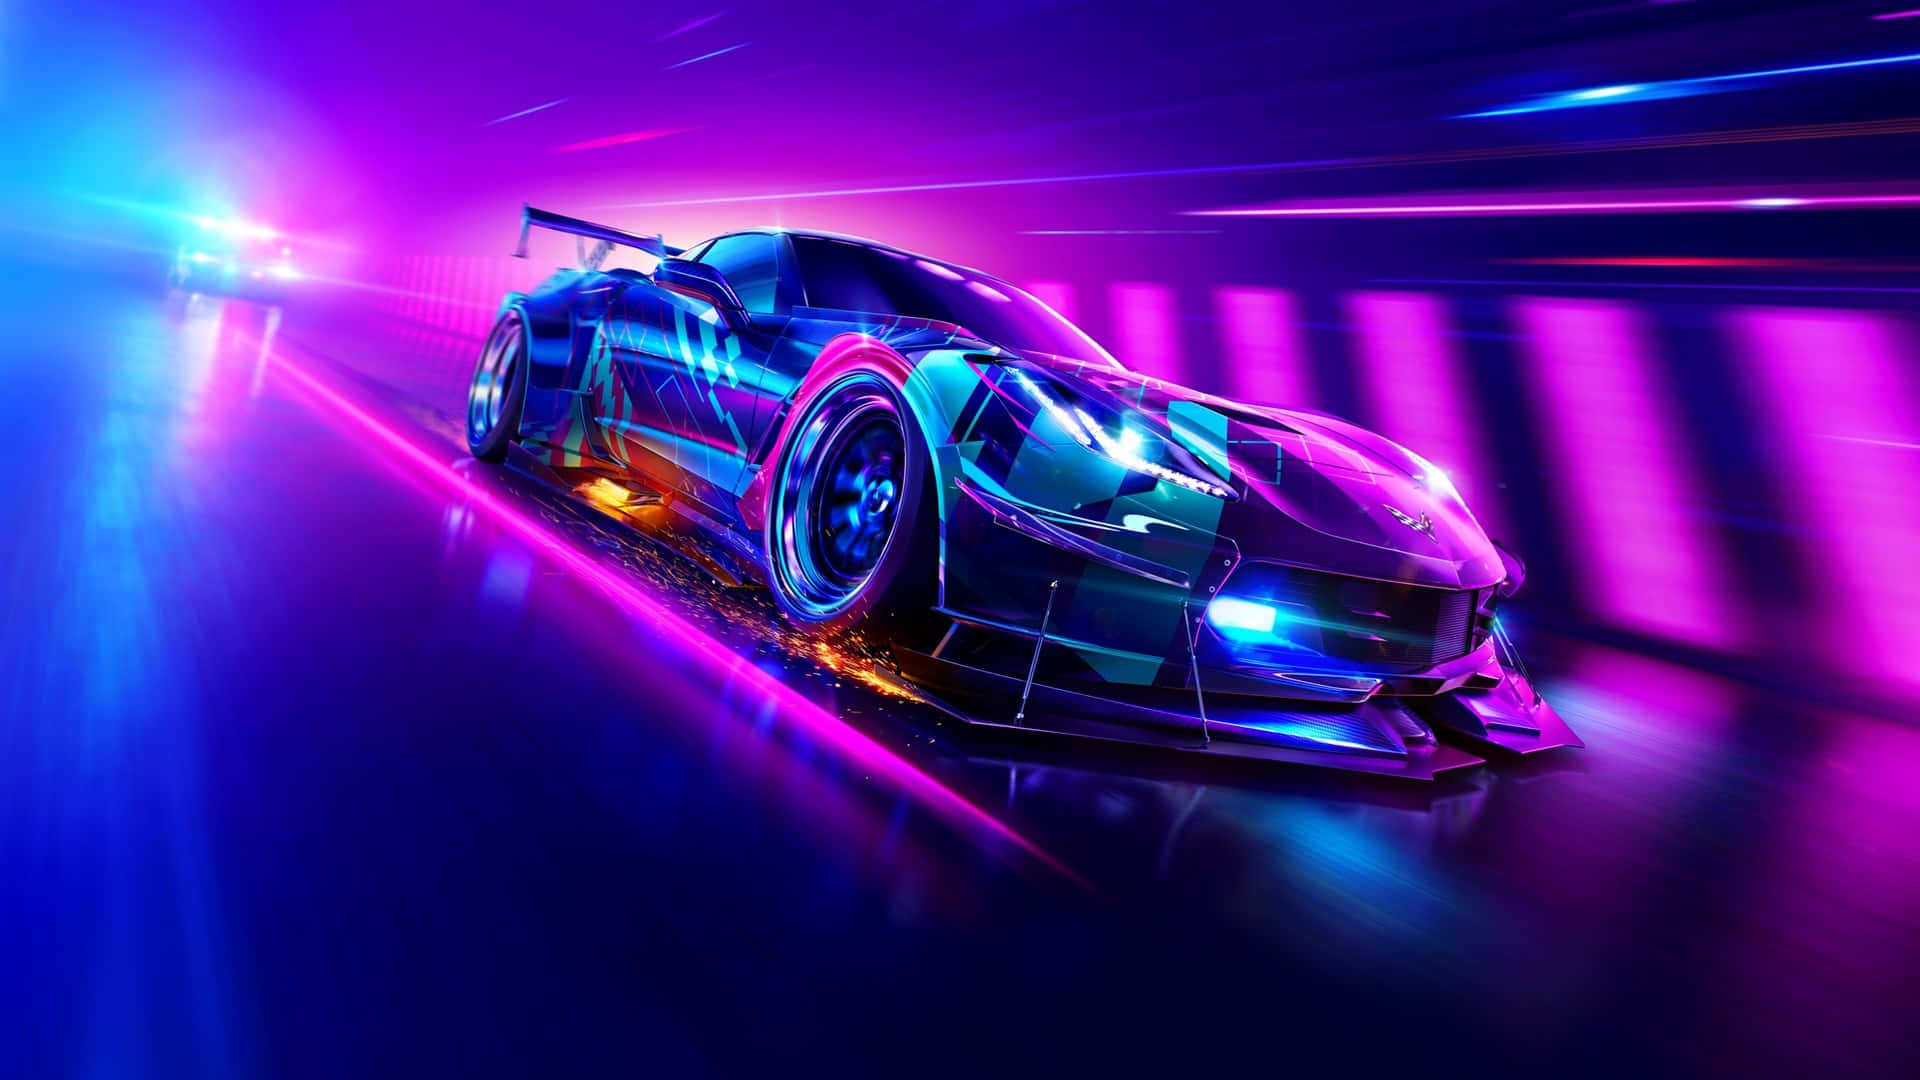 Landscape Neon Aesthetic Racing Car Cool Photos Background